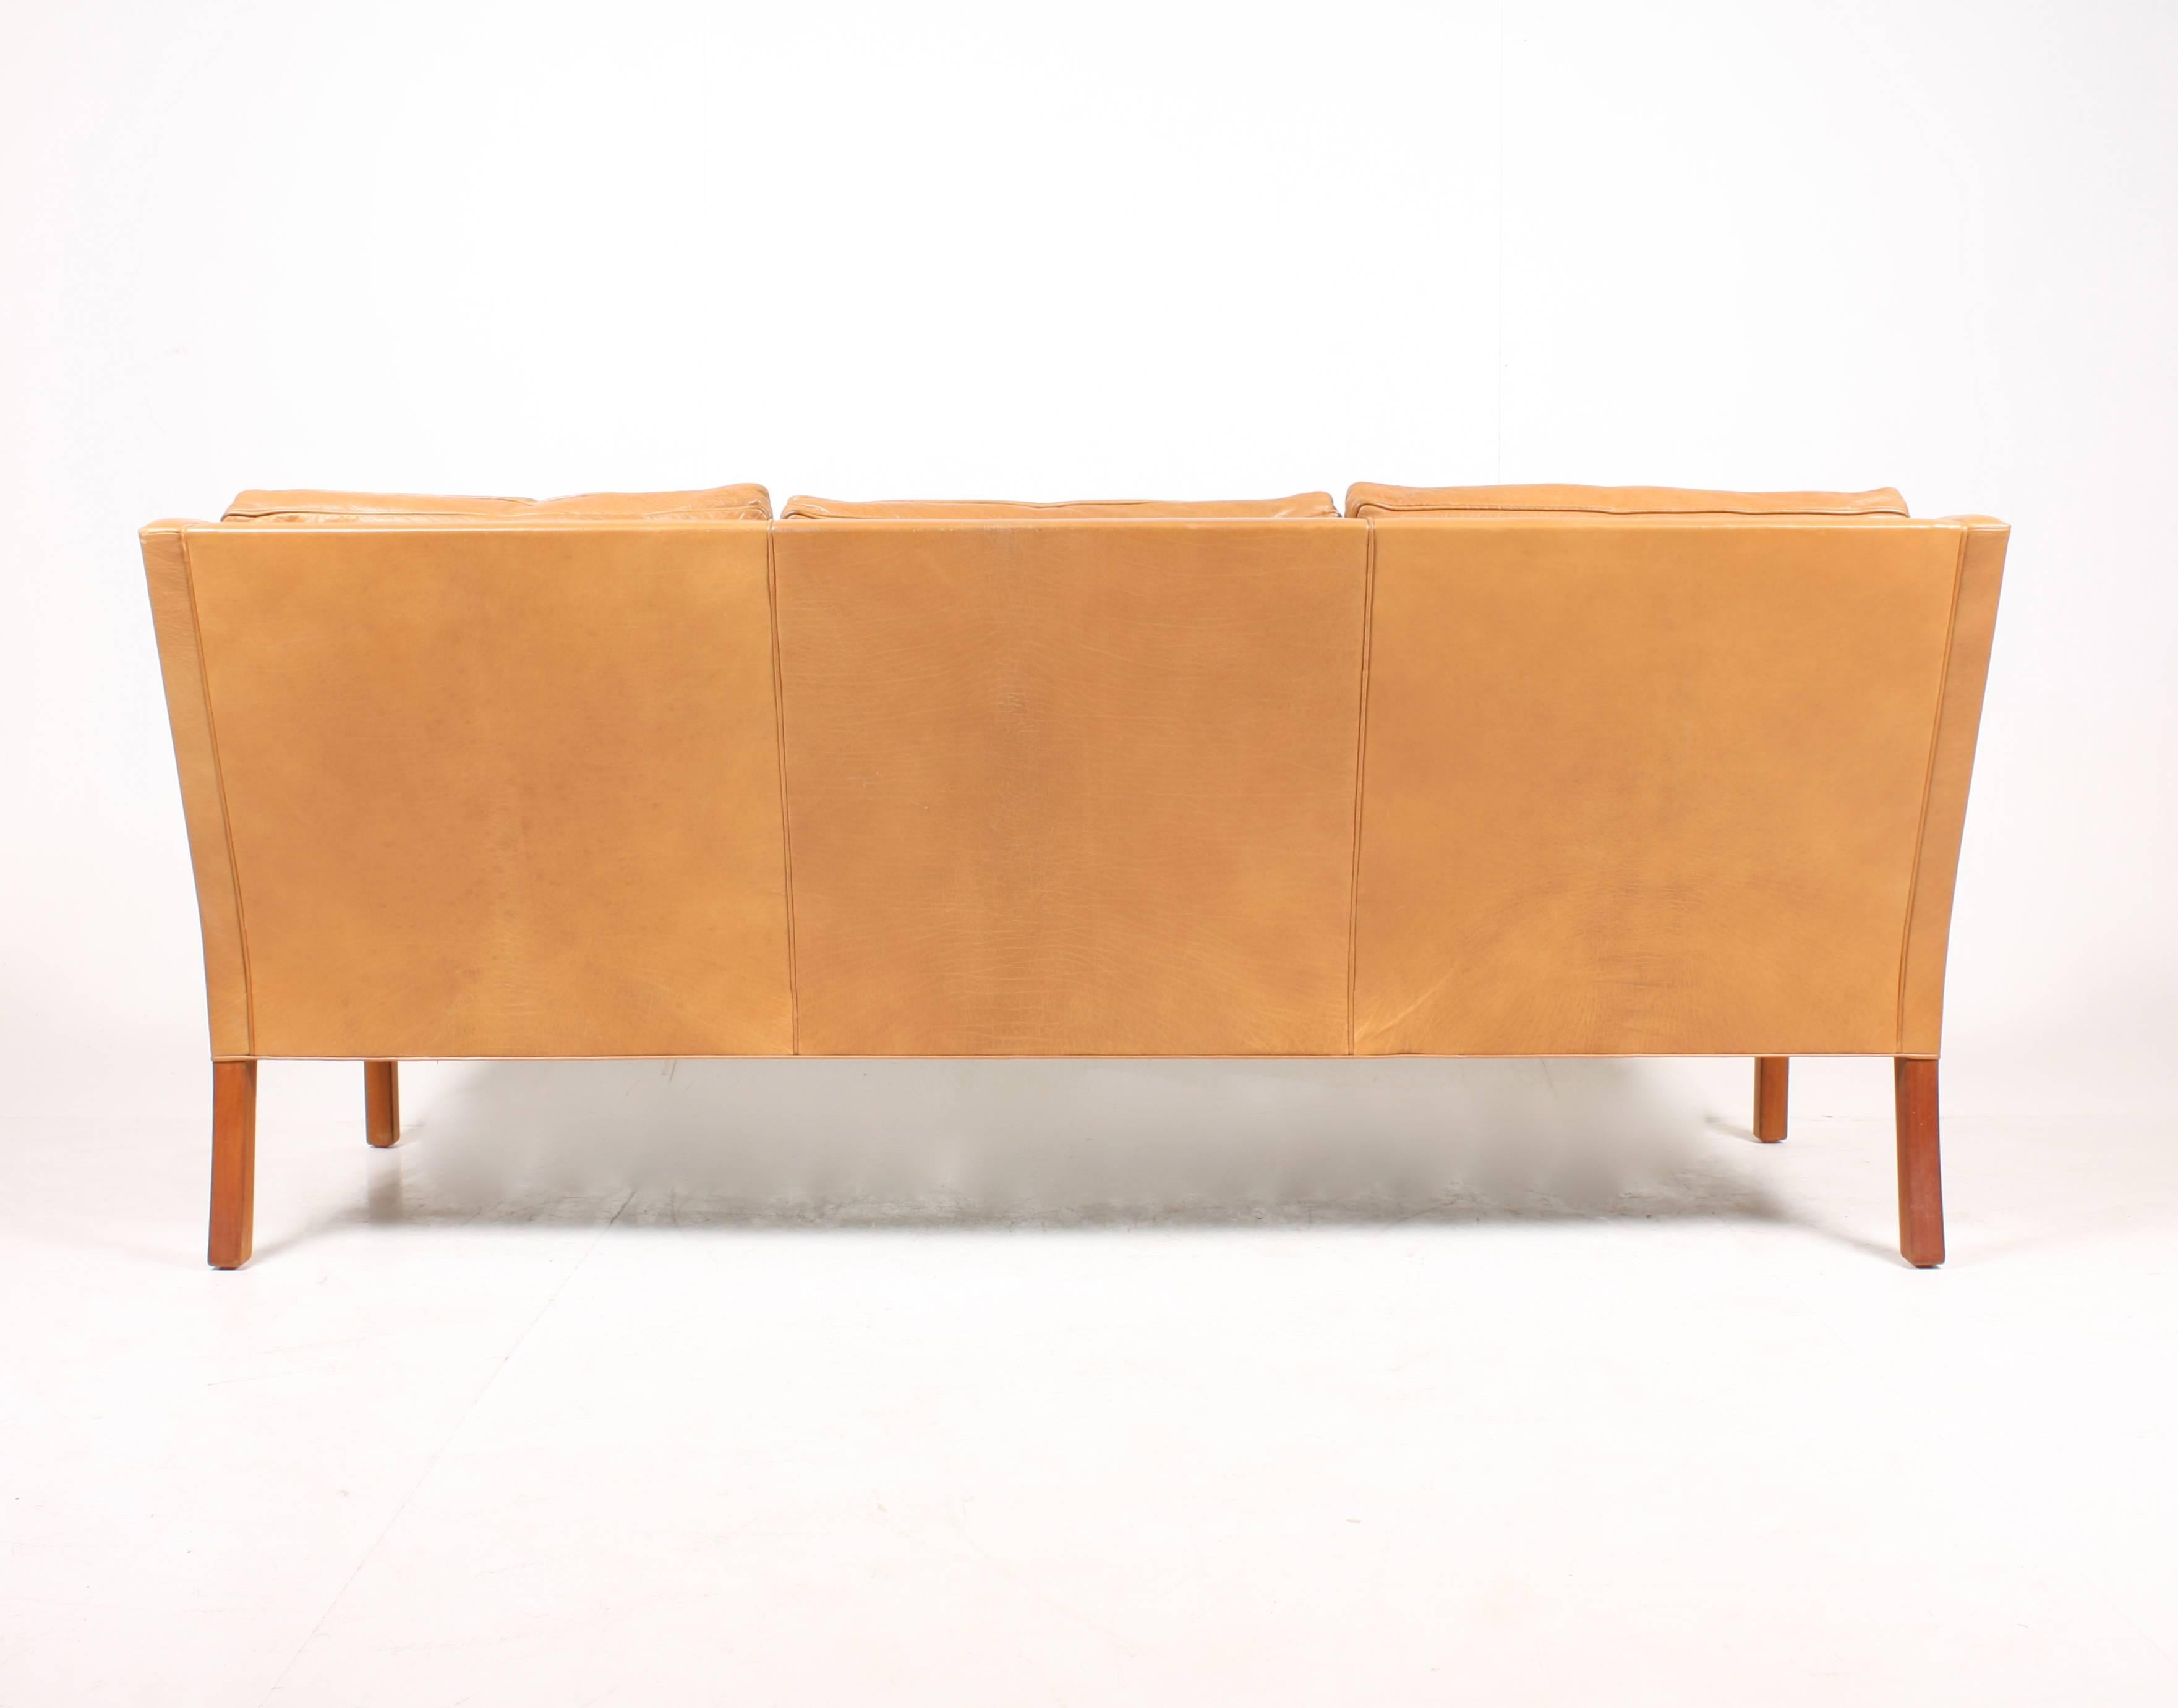 Elegant sofa model no. 2209 in patinated leather standing on legs of mahogany. Designed by Maa. Børge Mogensen in 1962 and made by Fredericia Furniture. Great original condition.